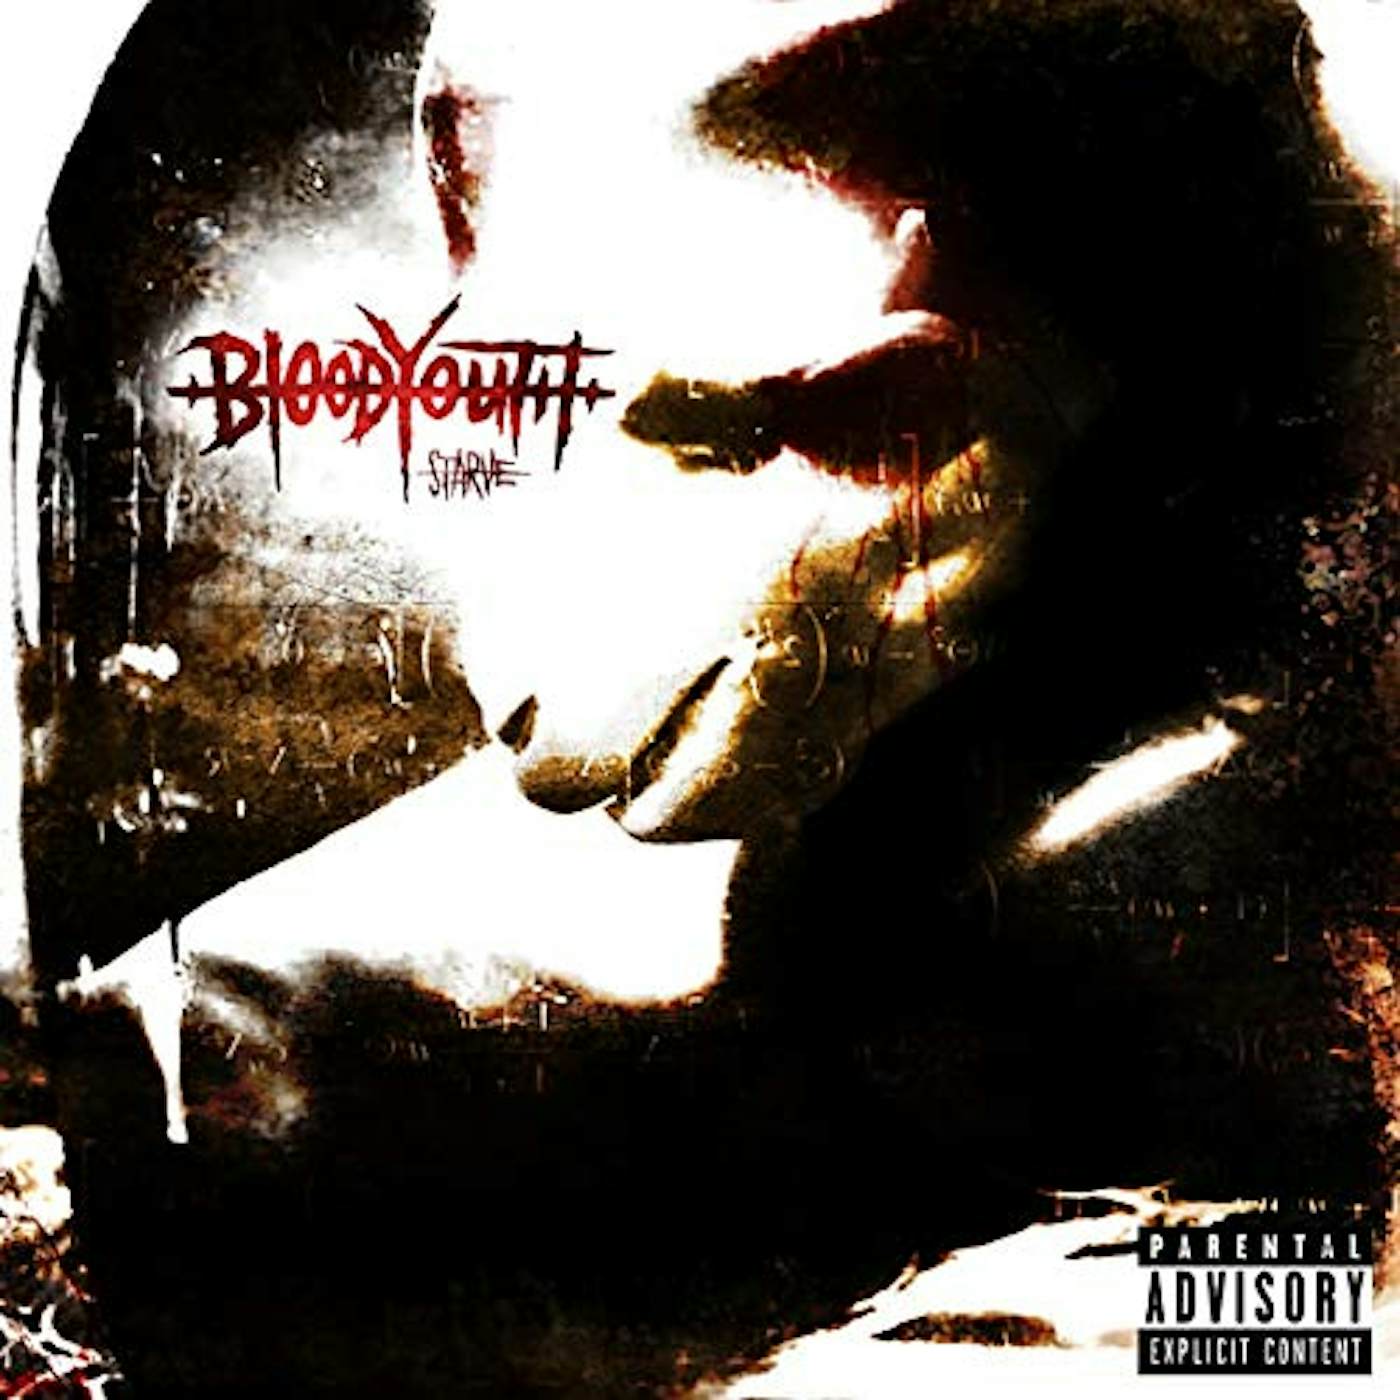 Blood Youth STARVE CD